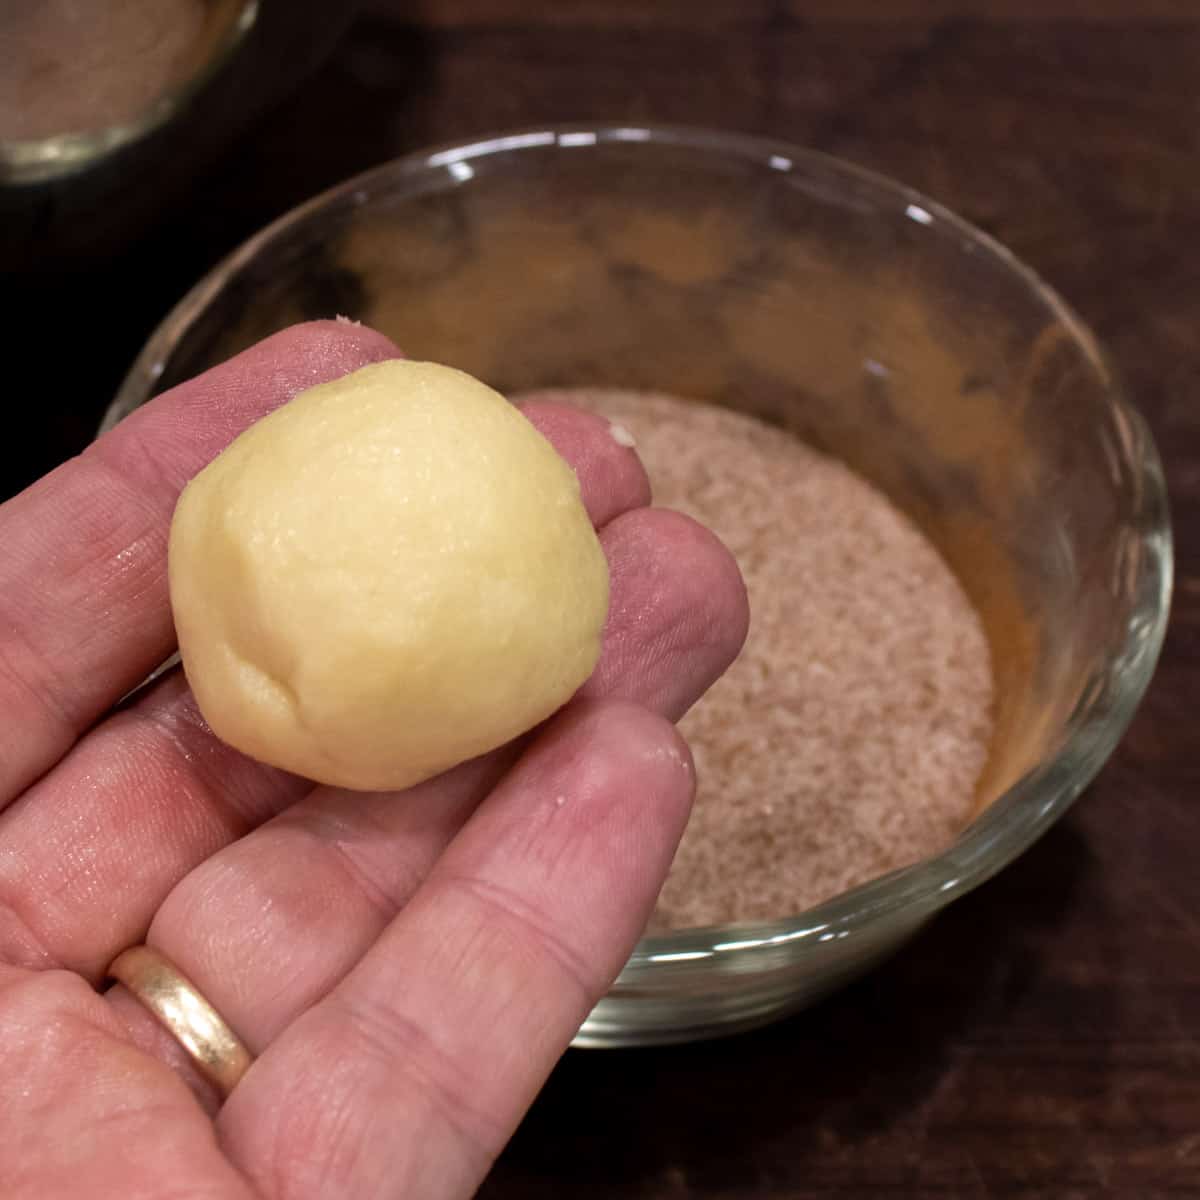 Cookie dough shaped into a small ball being held in a hand.